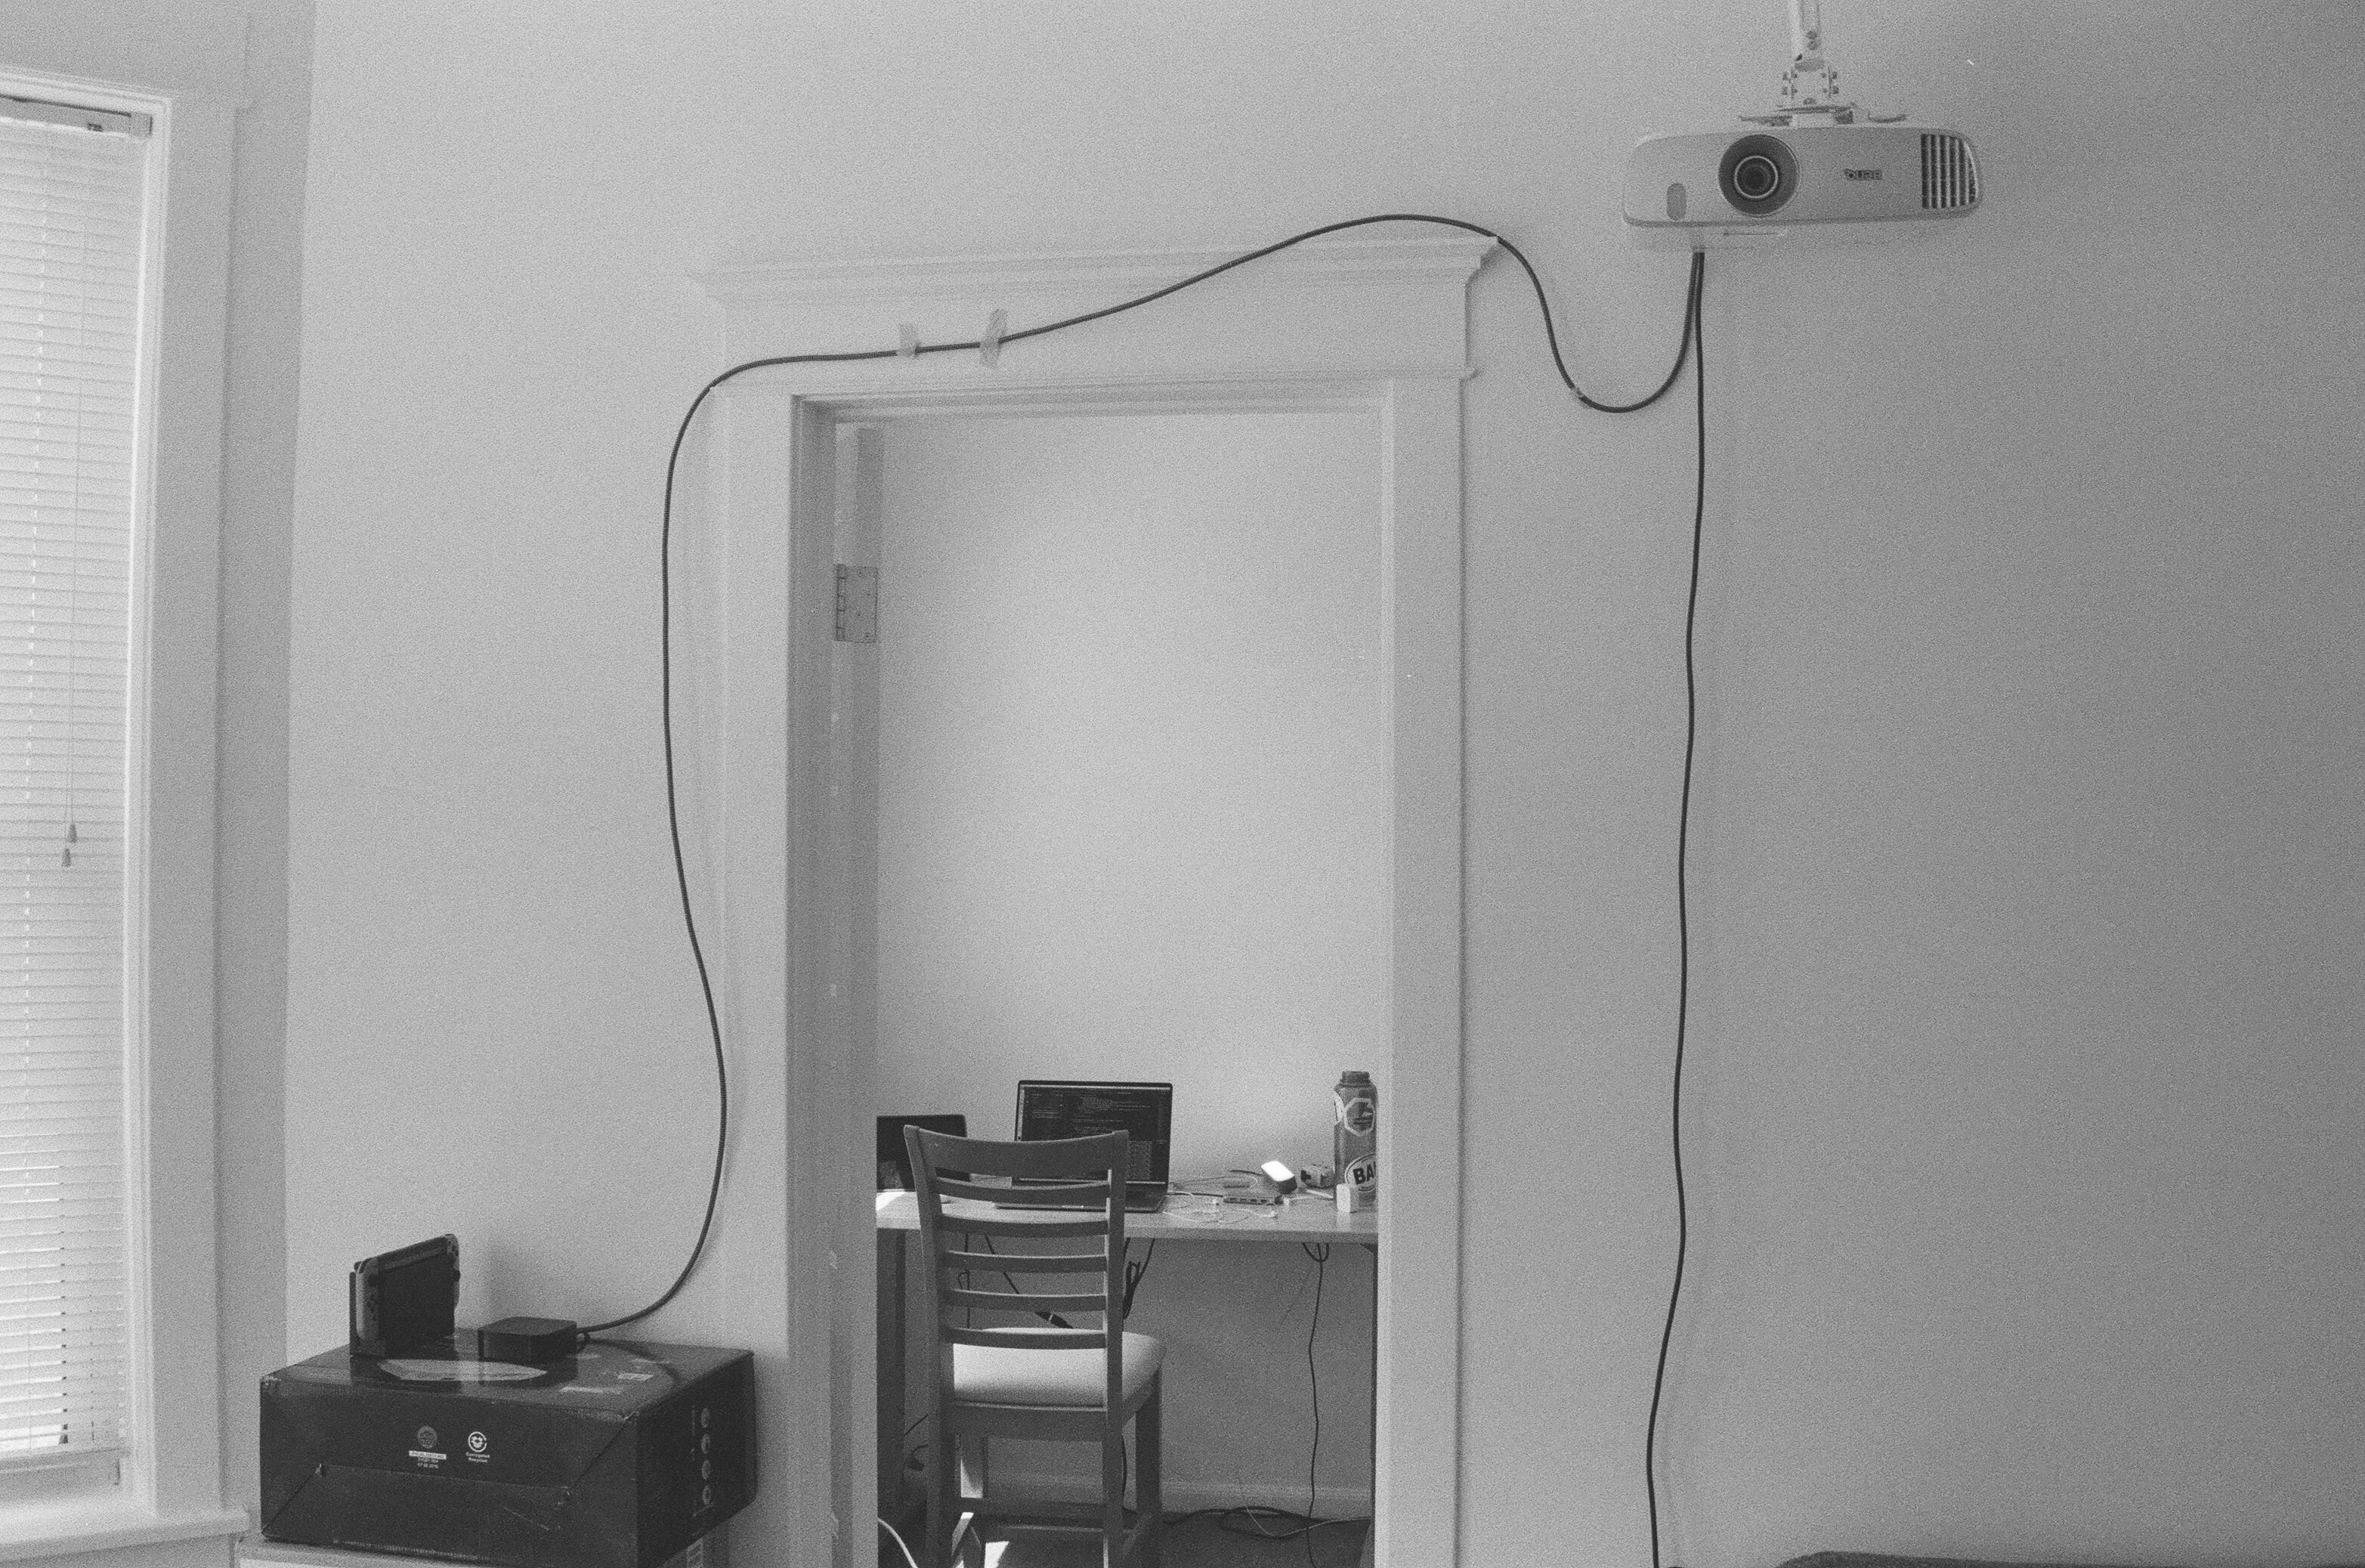 A picture of a doorway to a desk with a laptop on it. In front of the doorway, a cord is run sloppily from the bottom left across the top to a ceiling mounted projector.